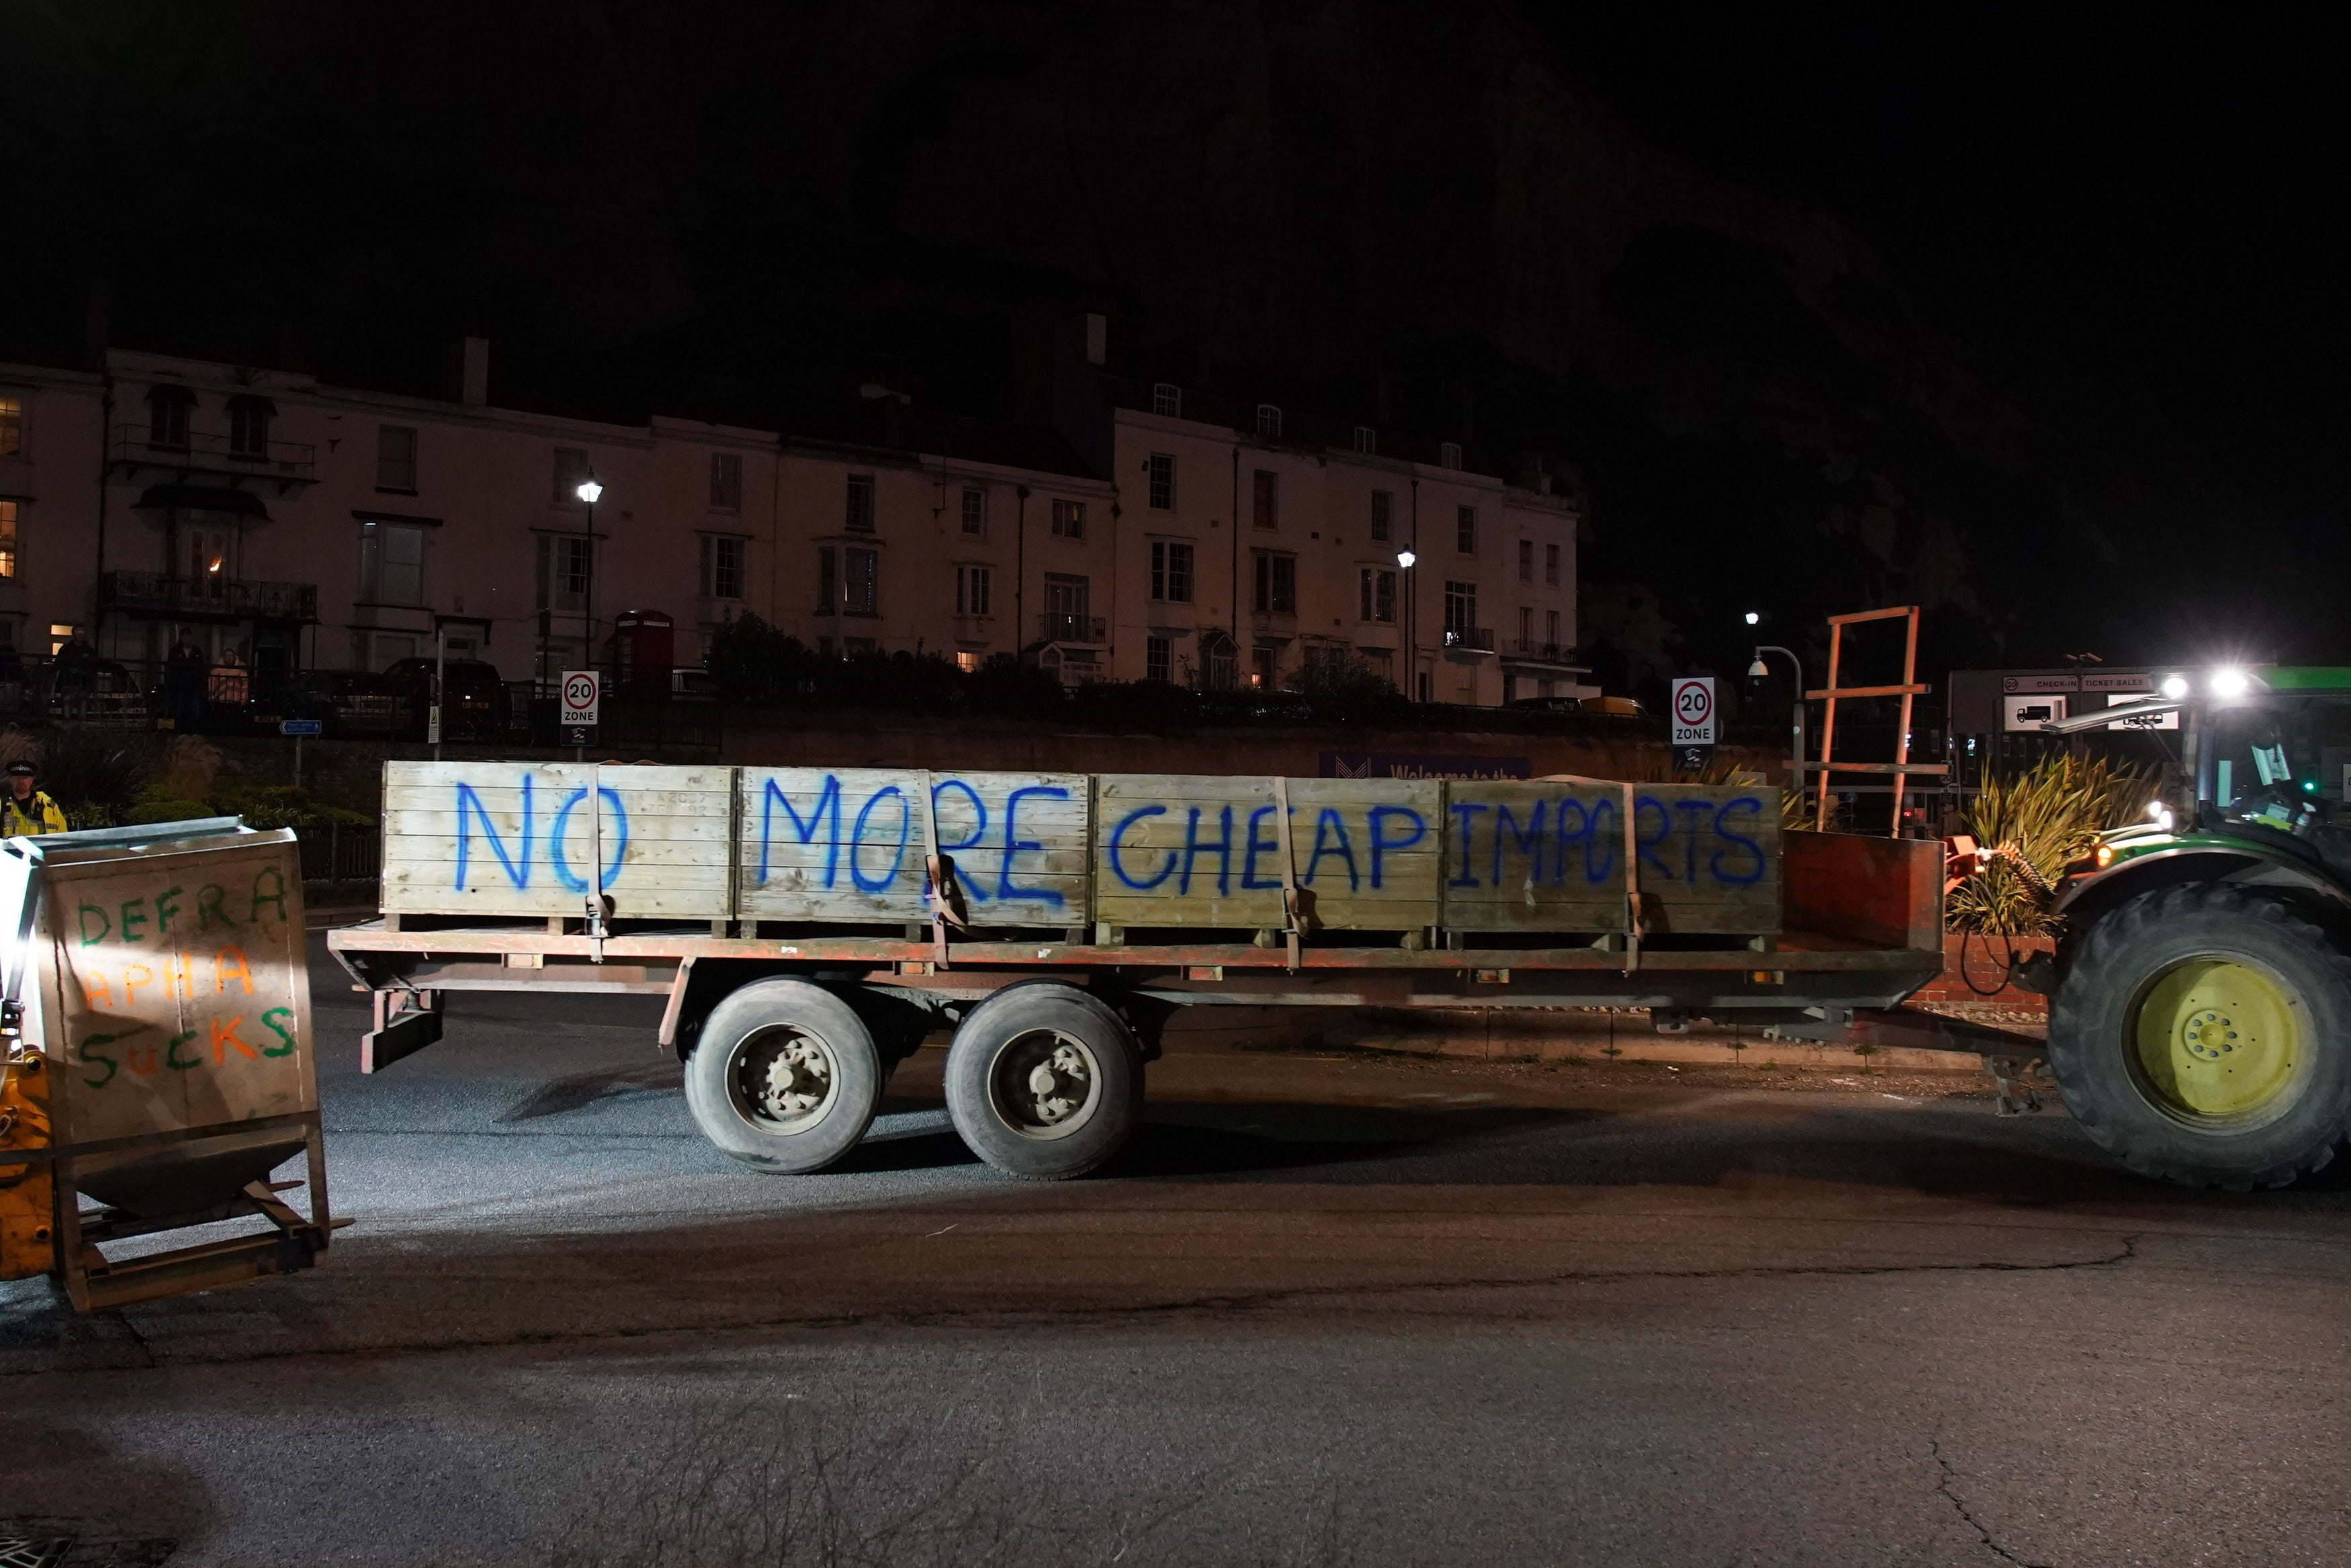 One tractor with a trailer had “no more cheap imports” spray painted on the side of it